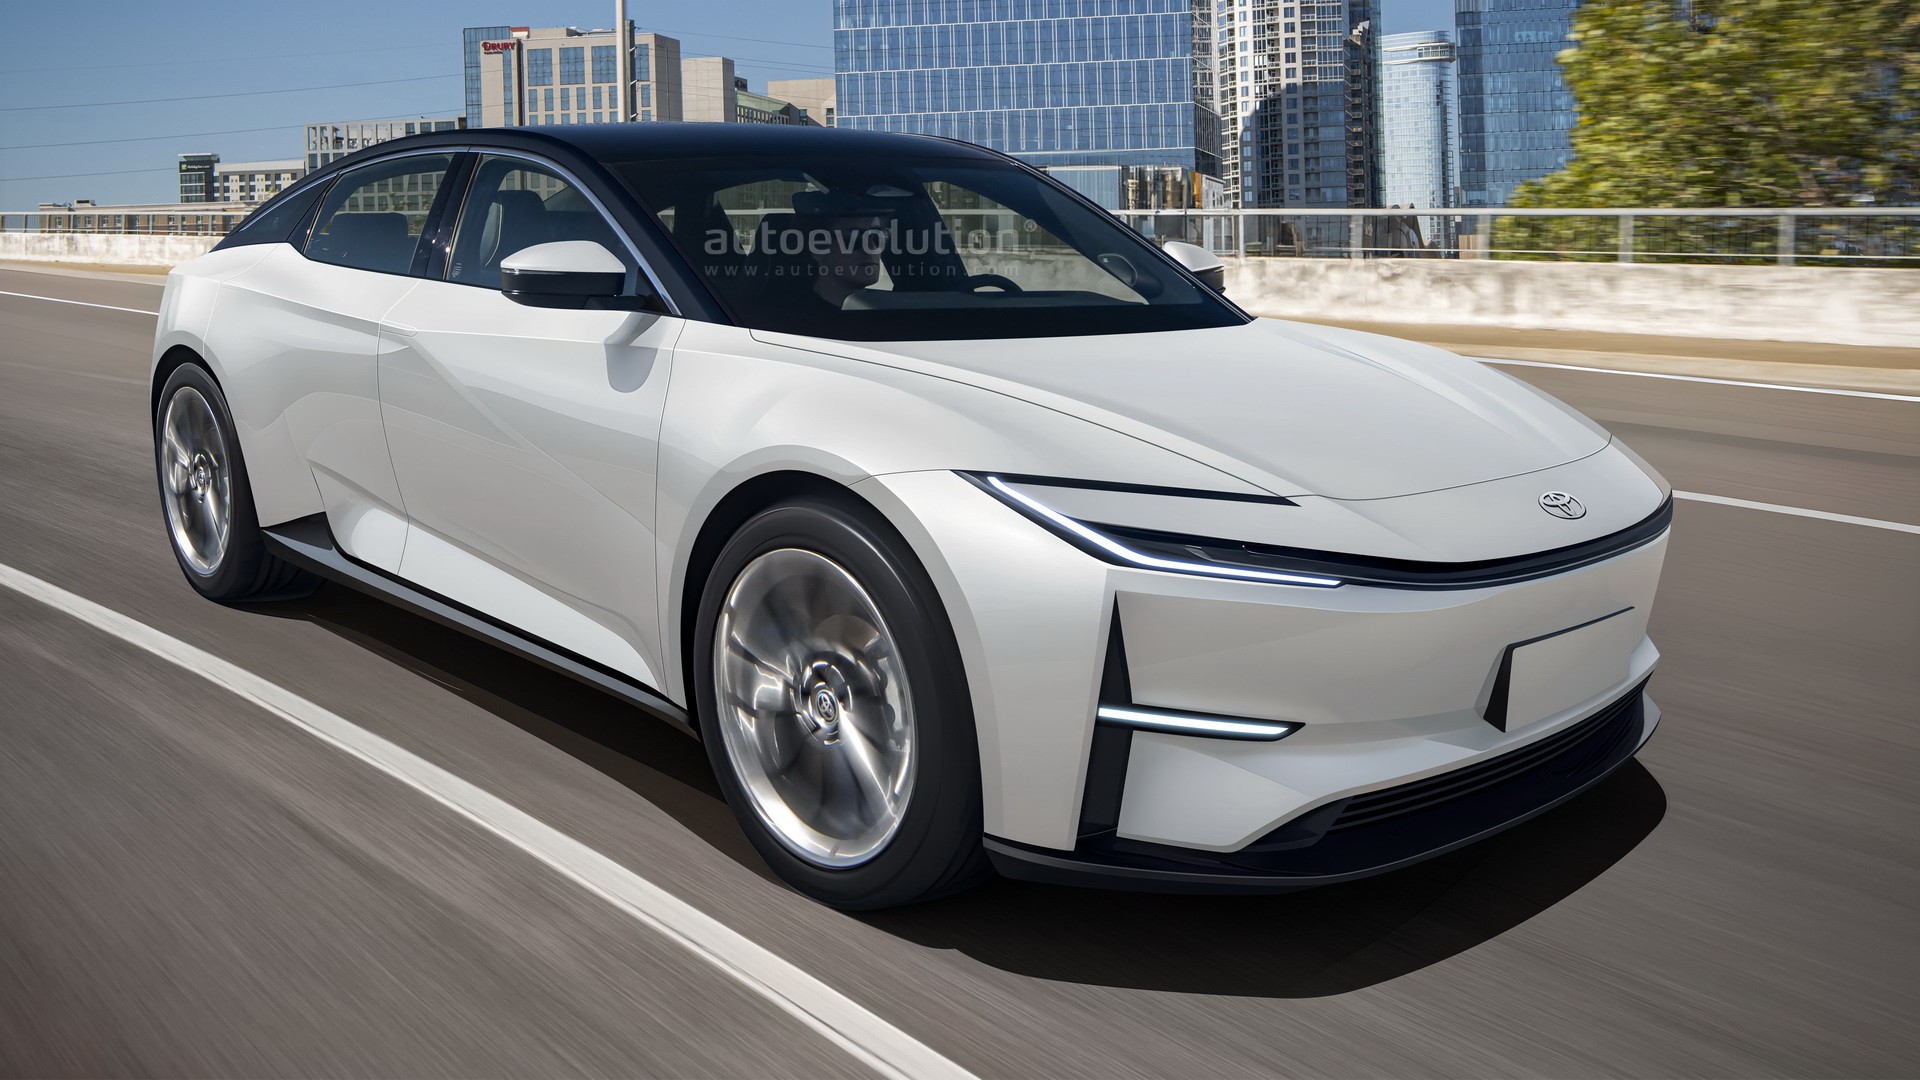 next-gen-2030-toyota-camry-ev-takes-the-fight-to-tesla-check-out-our-exclusive-design-6.jpg